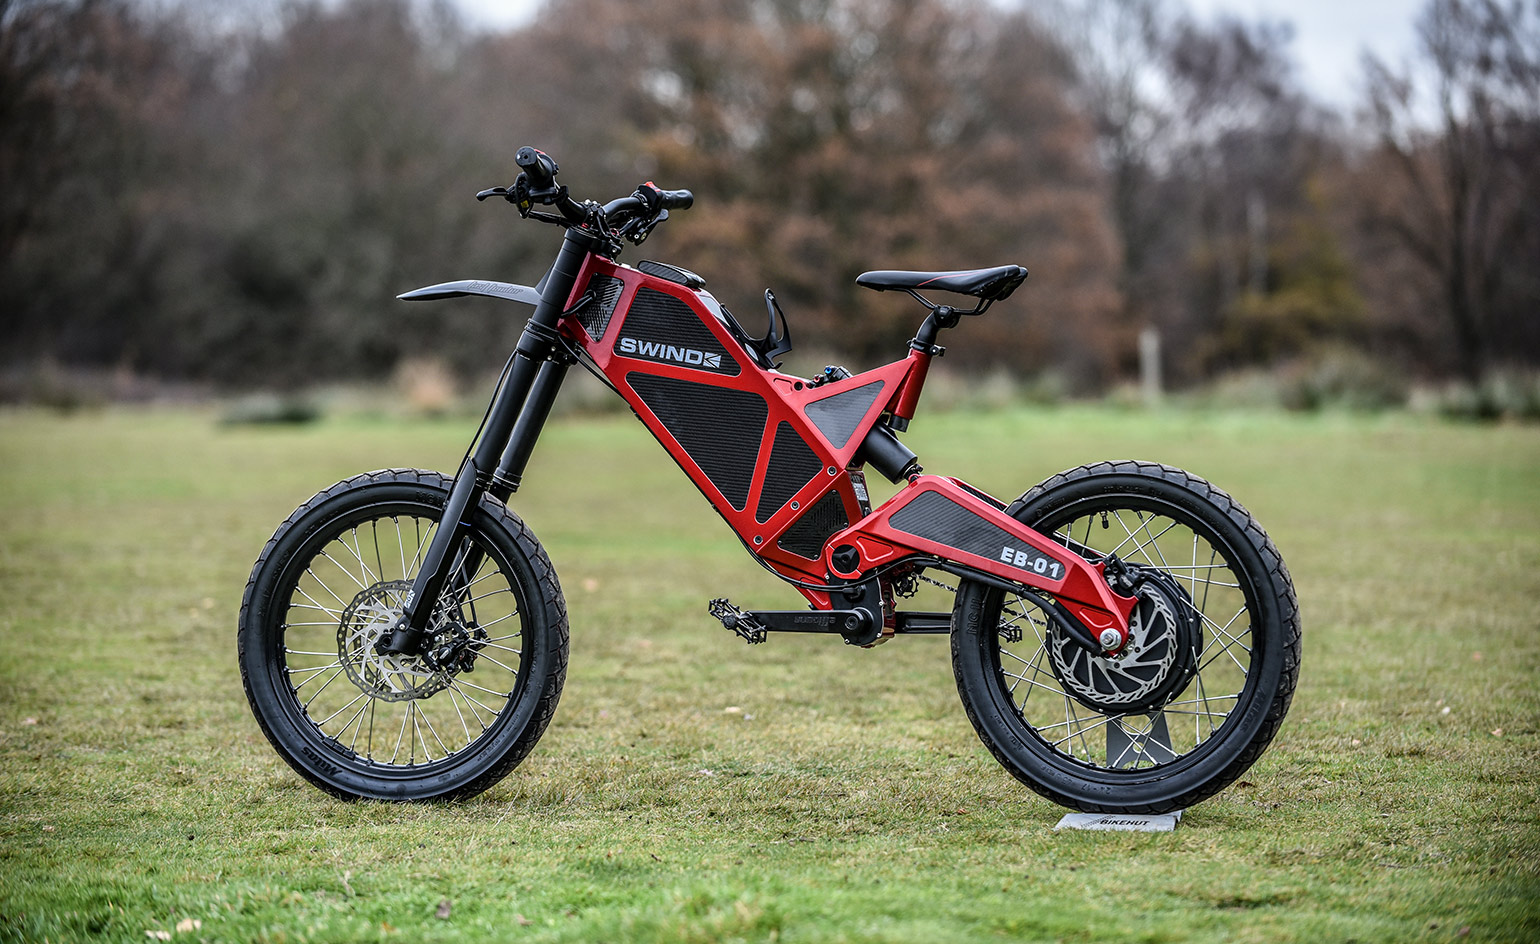 Reviewing the the 2018 EB-01: SWIND e-bike in fastest world | Wallpaper